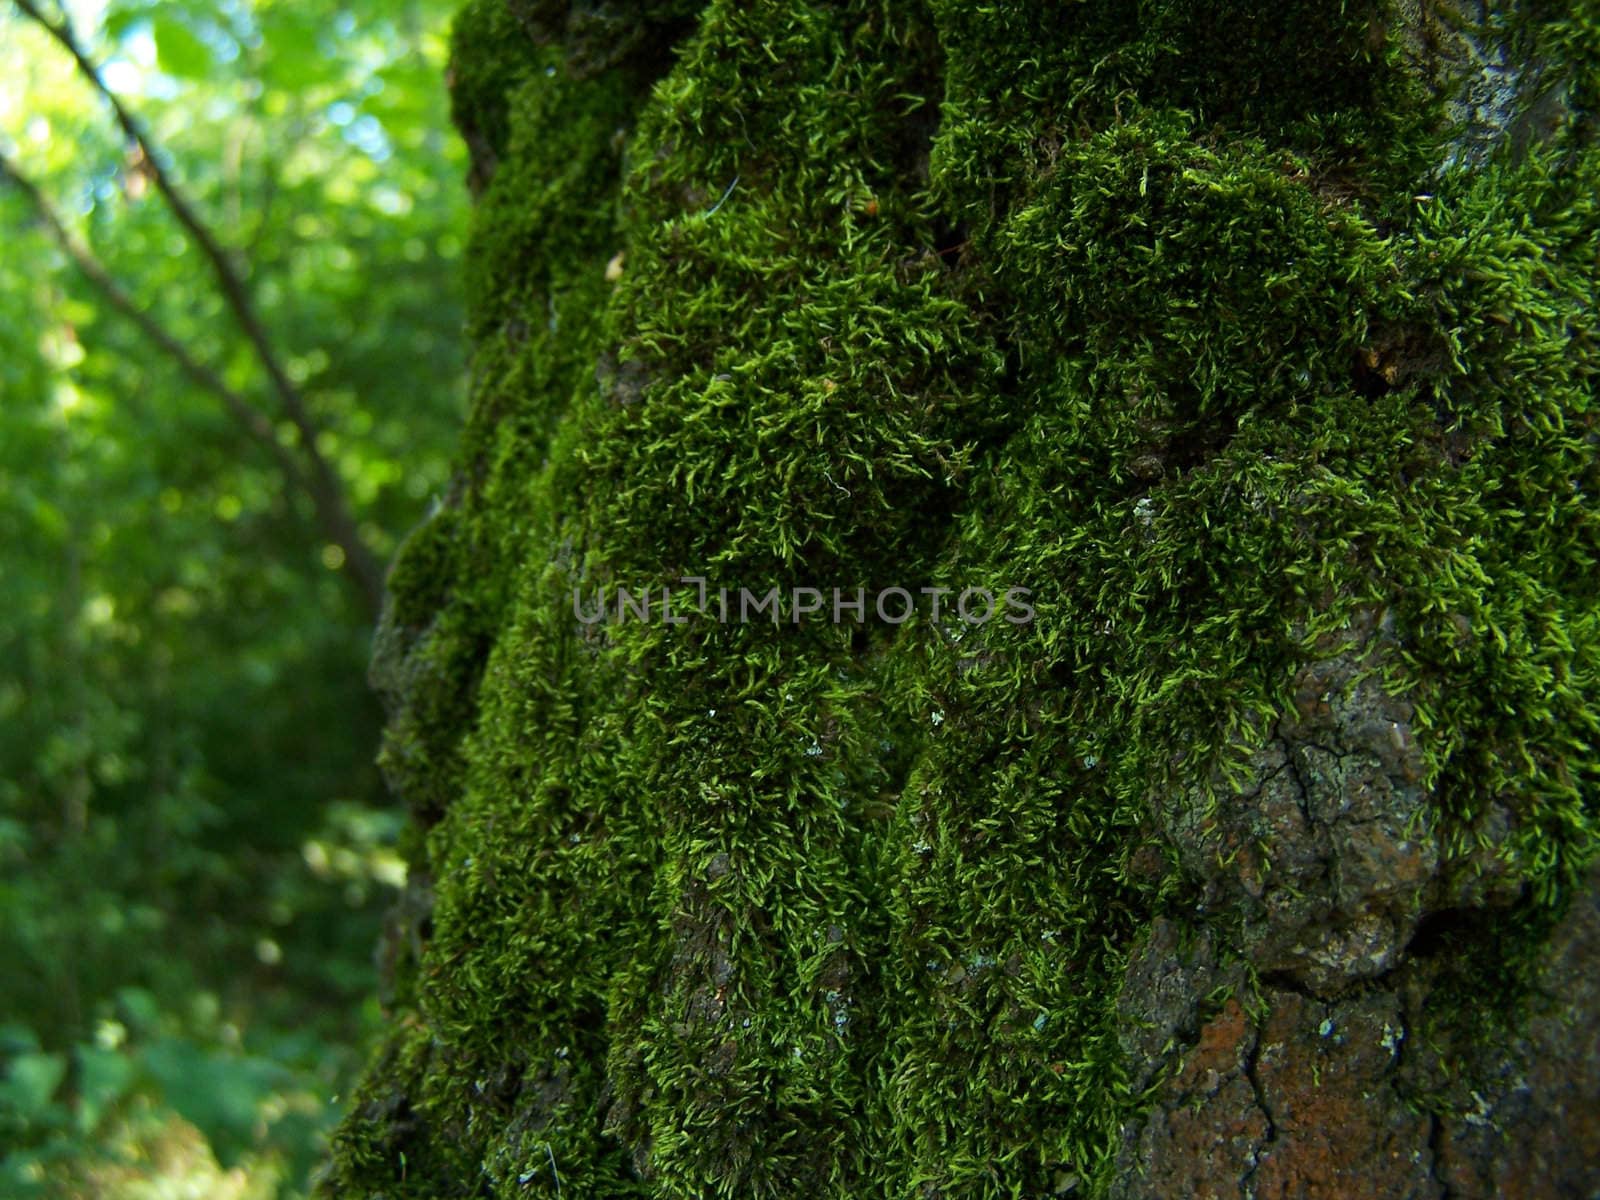 Moss on the old tree.